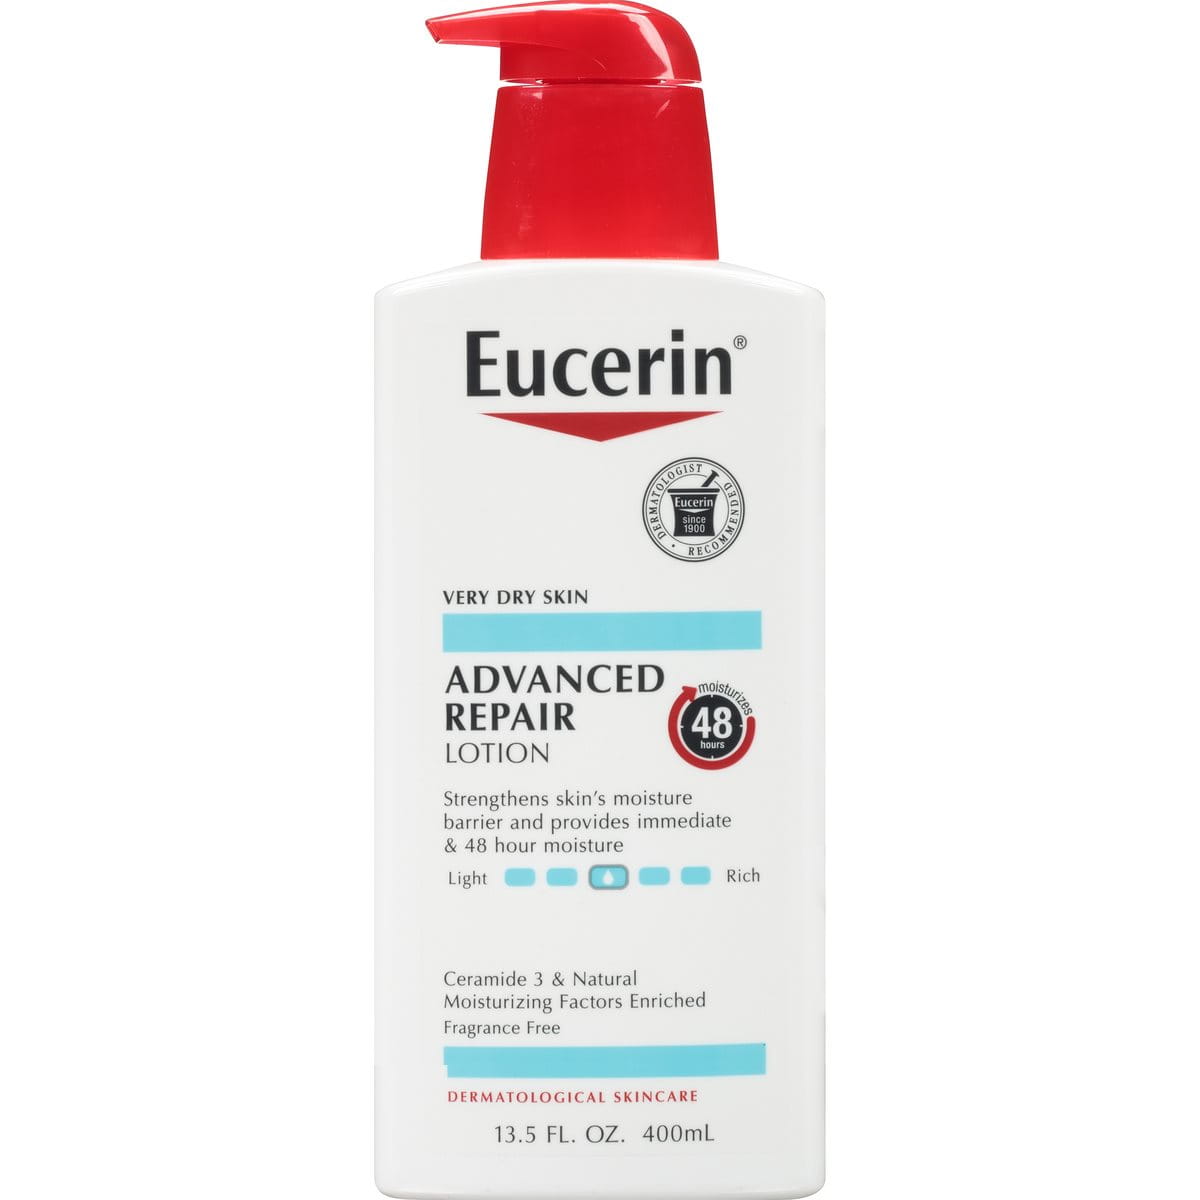  Eucerin Sun Clear Skin SPF 50 Face Sunscreen Lotion,  Hypoallergenic, Fragrance Free Sunscreen SPF 50 with Oil-Absorbing  Minerals, 2.5 Fl Oz Bottle : Beauty & Personal Care